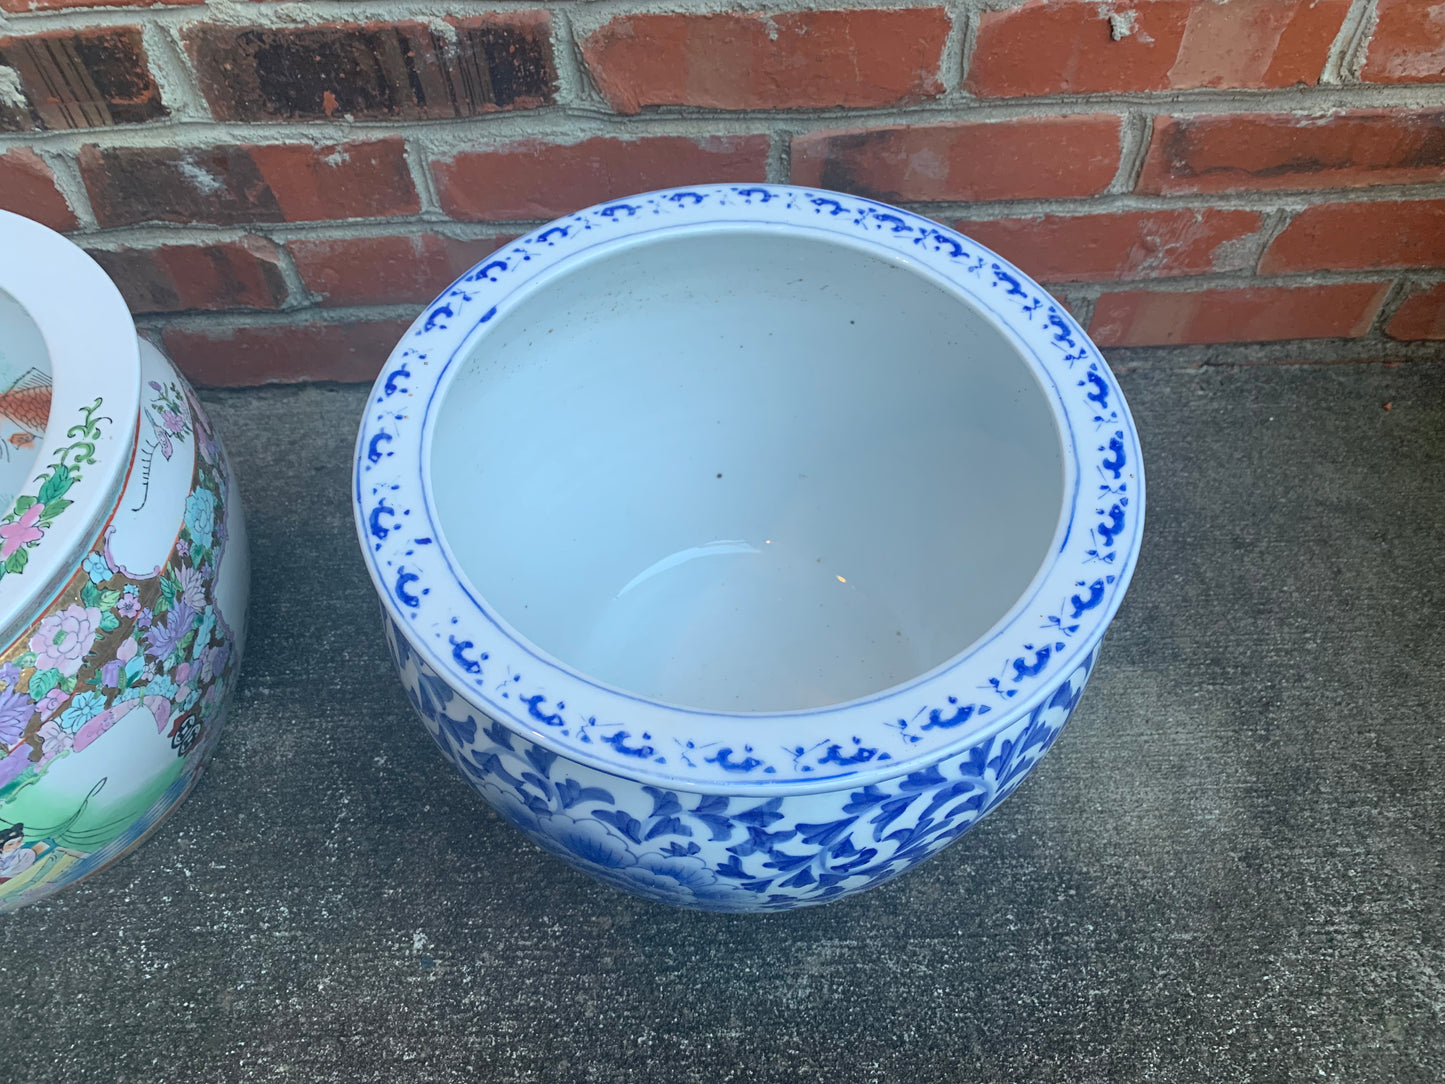 Beautiful Large blue and white fishbowl planter with flowers- Excellent condition!